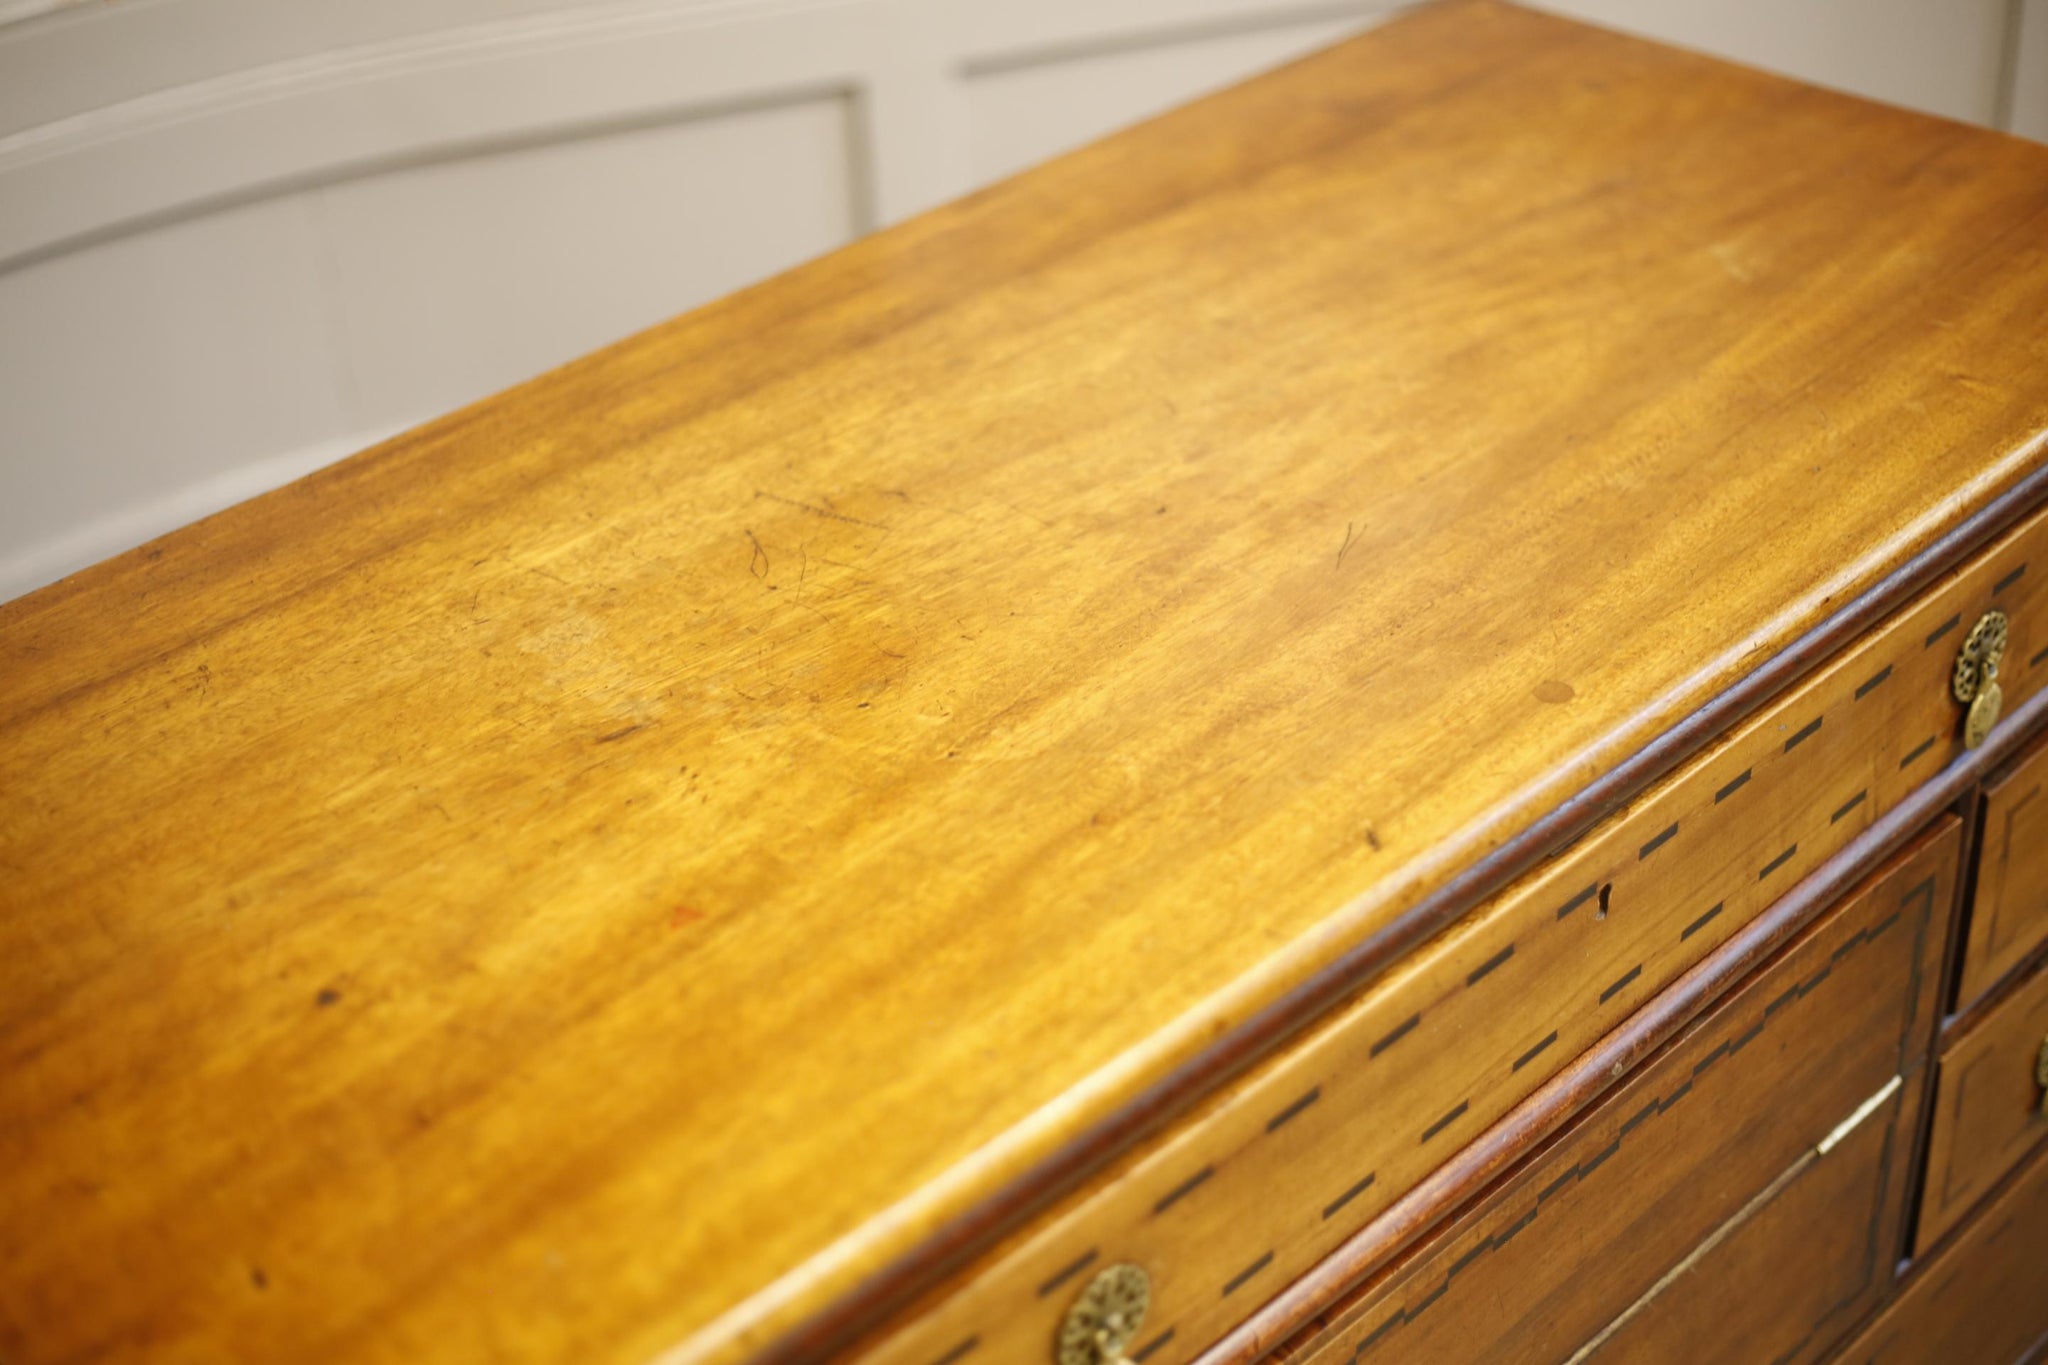 19th century Anglo-Chinese campaign secretaire chest of drawers - TallBoy Interiors